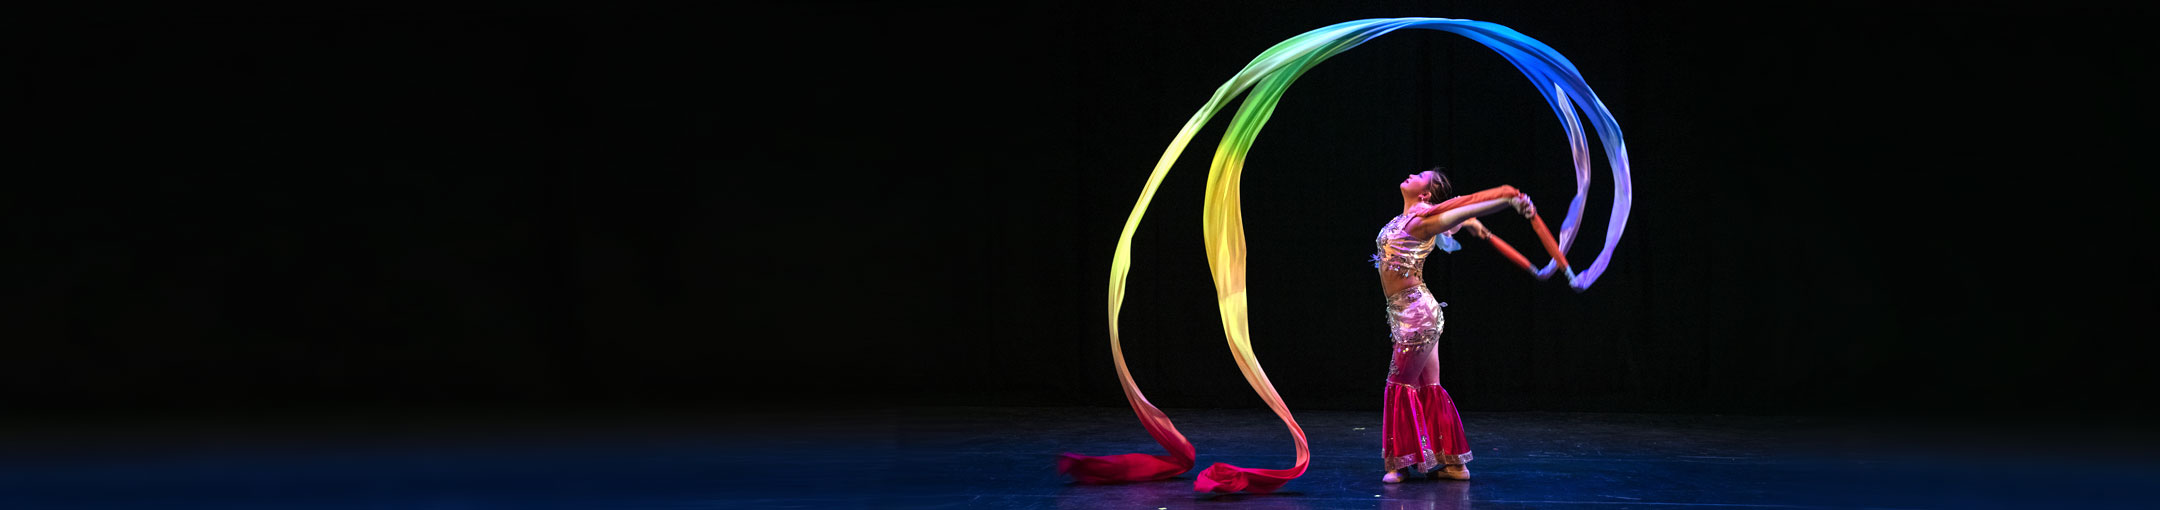 A woman dances on stage with colorful ribbons.